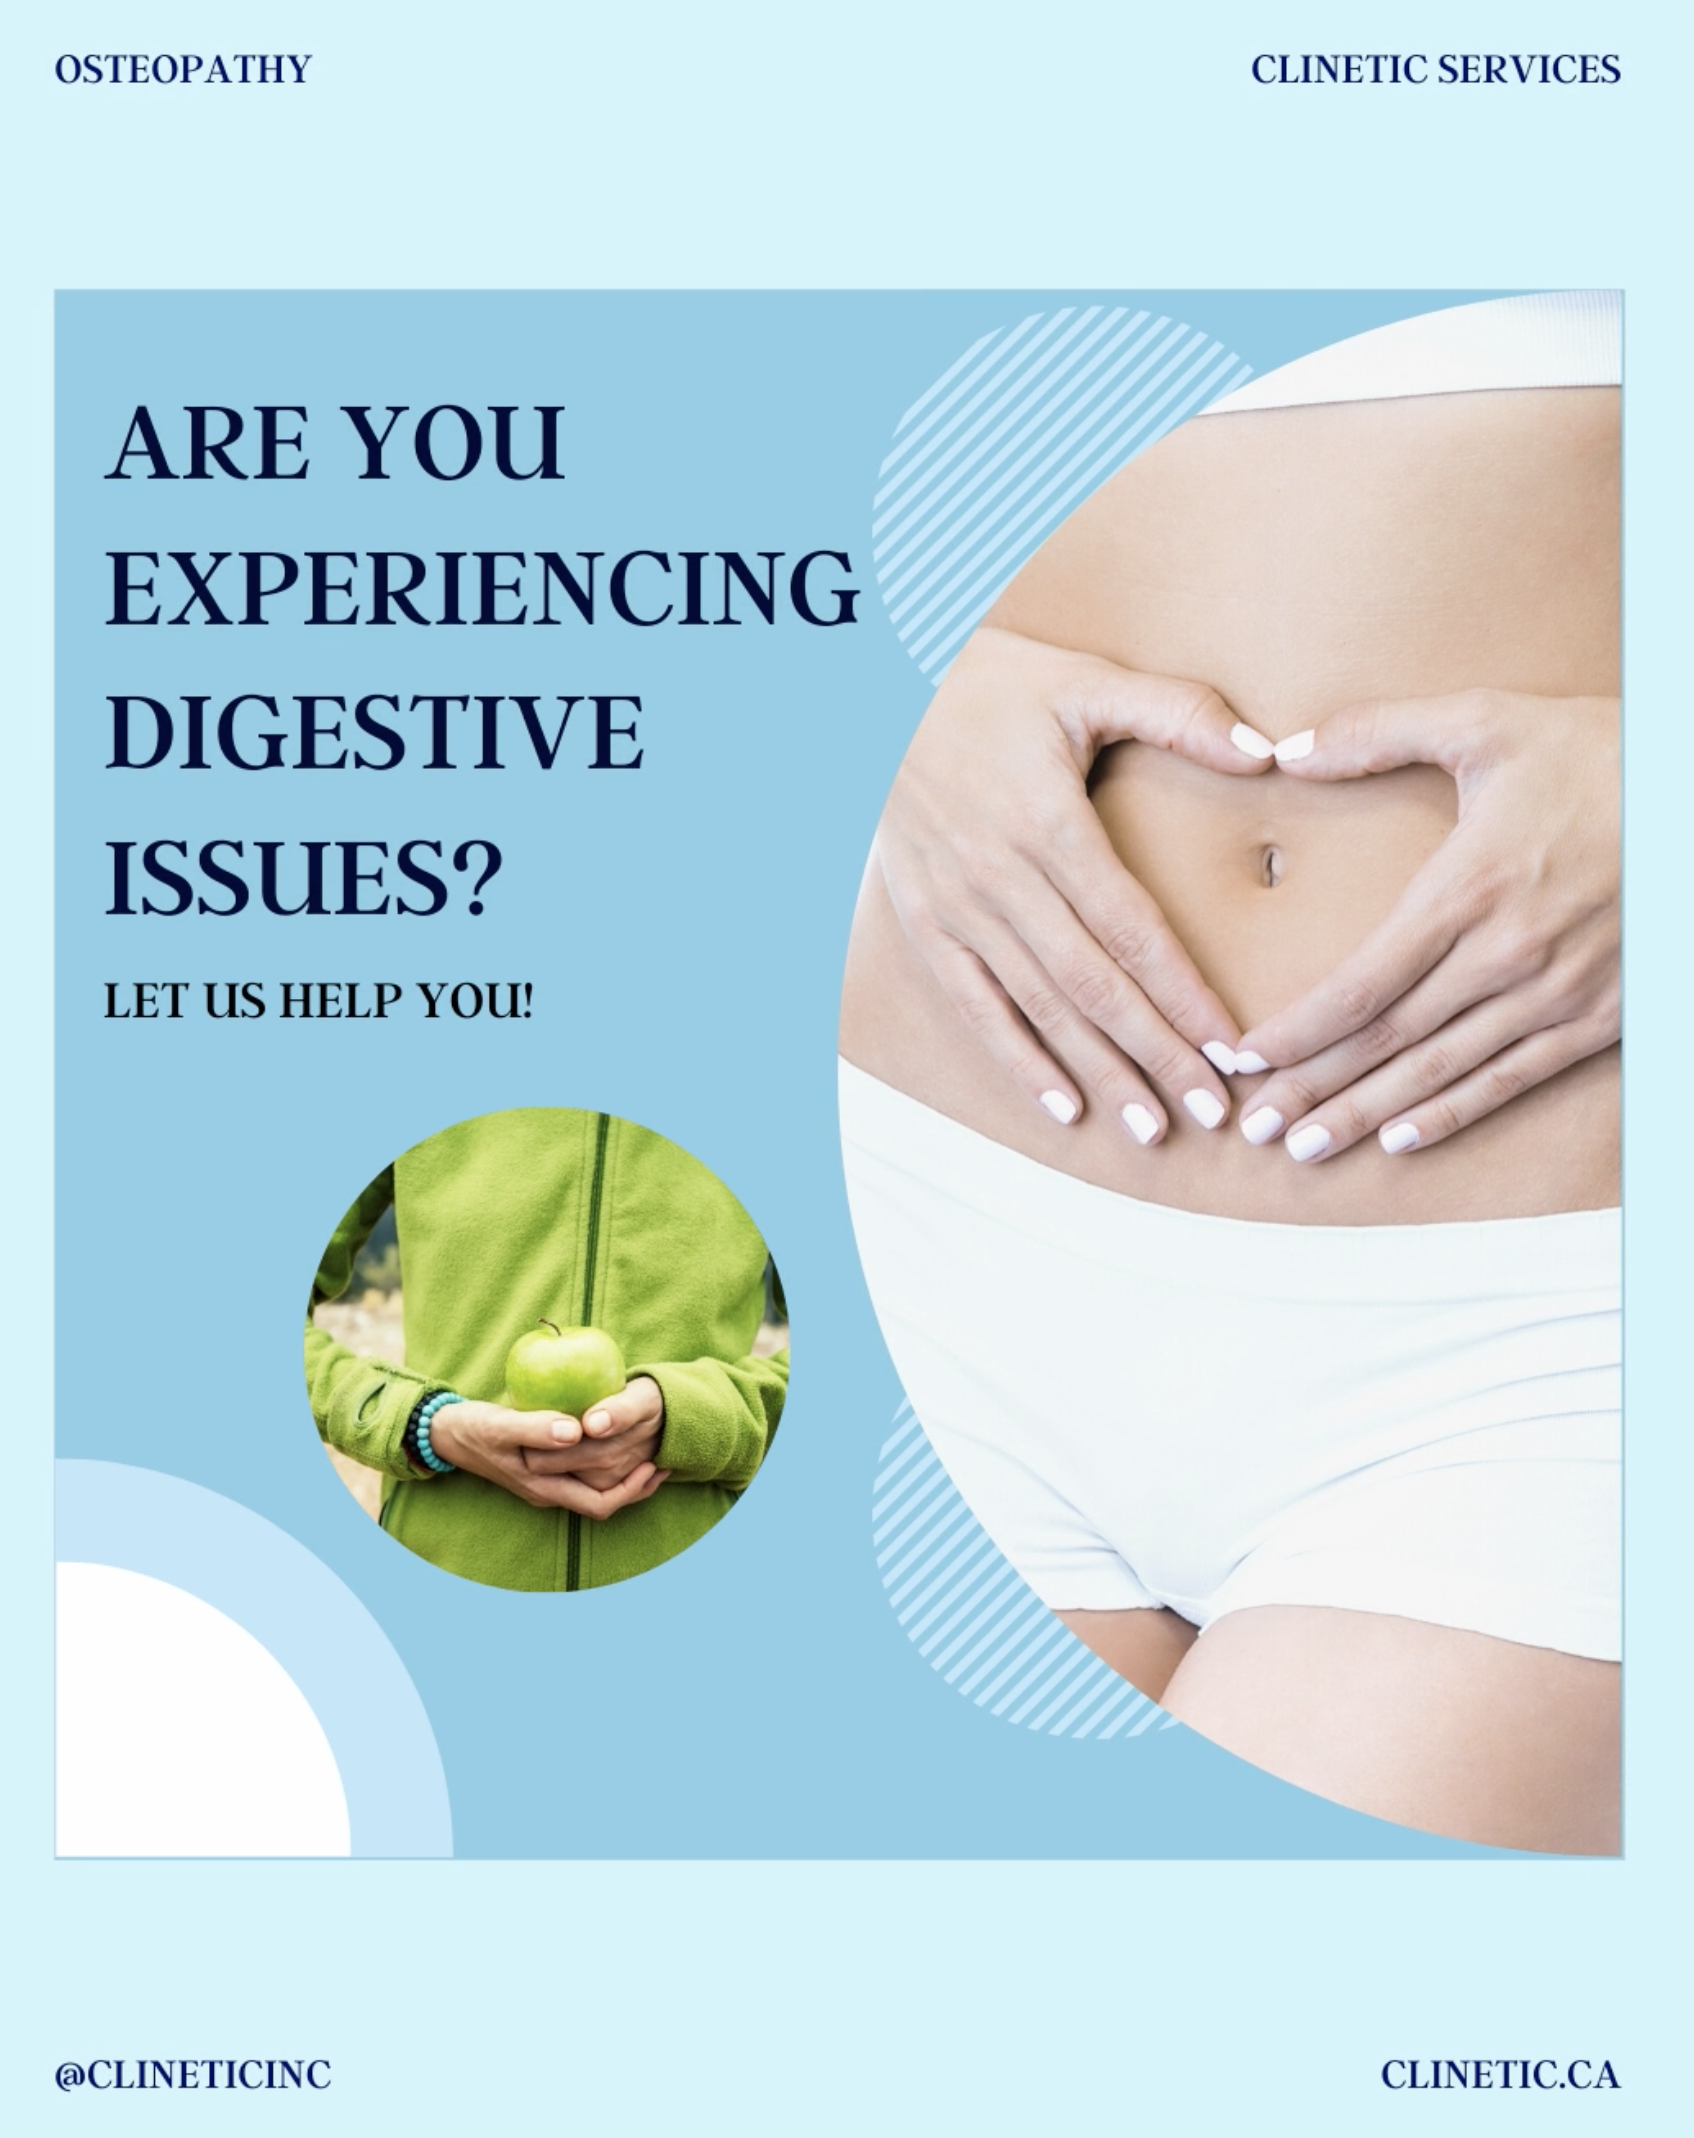 Are you experiencing digestive issues?